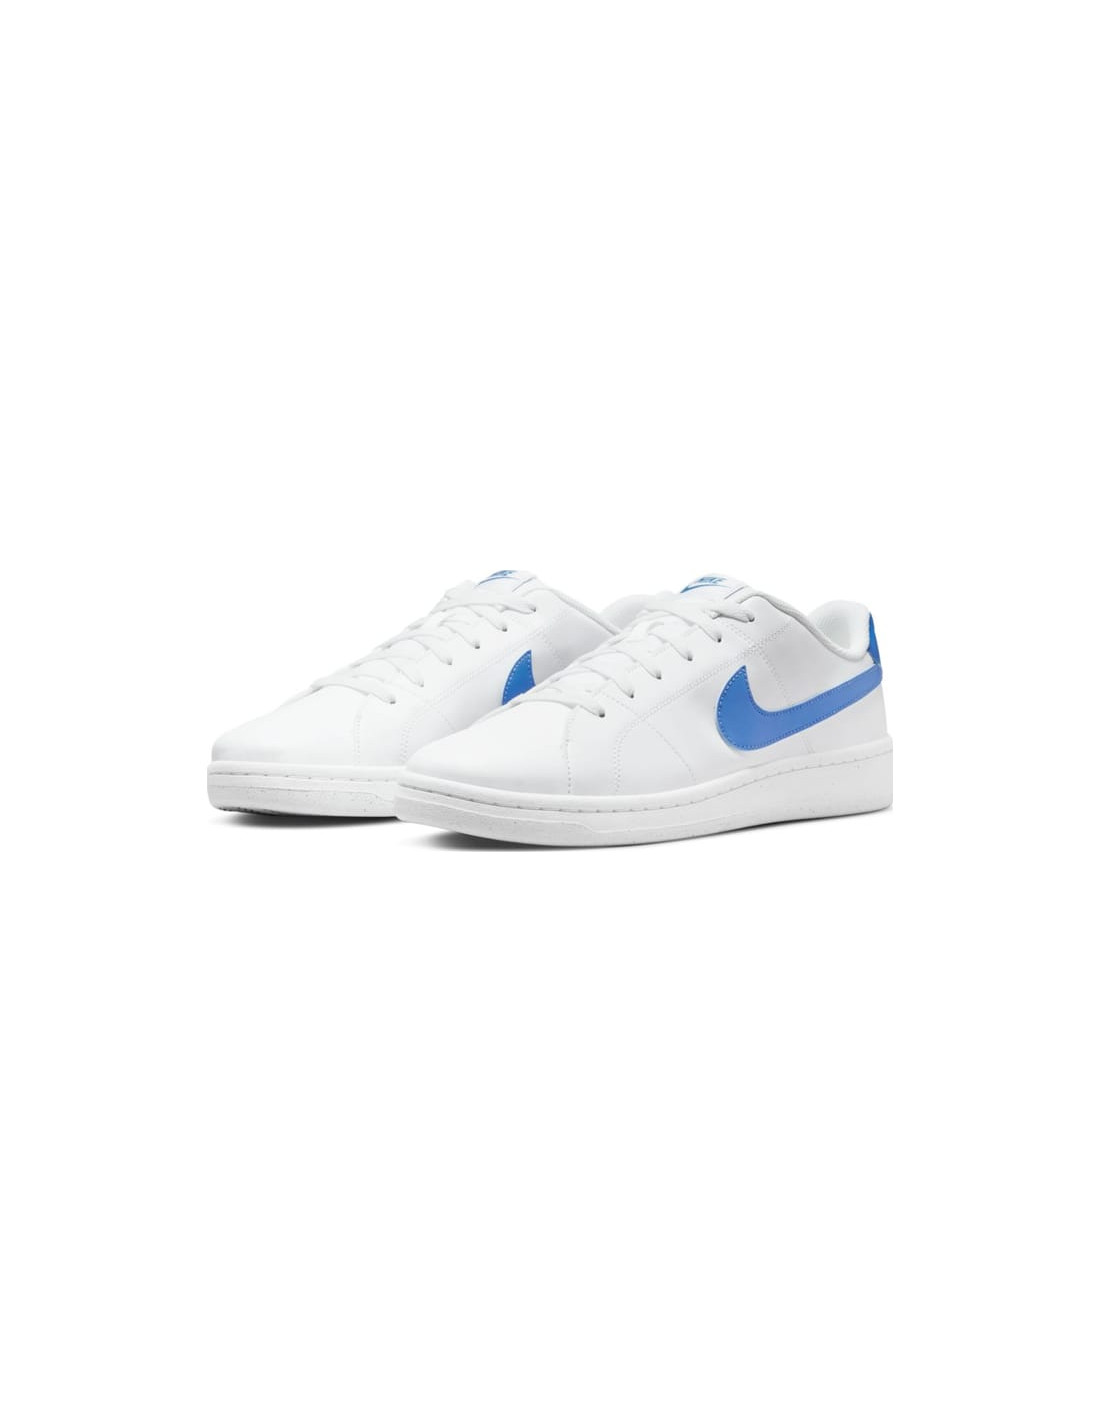 NIKE COURT ROYALE 2 BETTER ESS